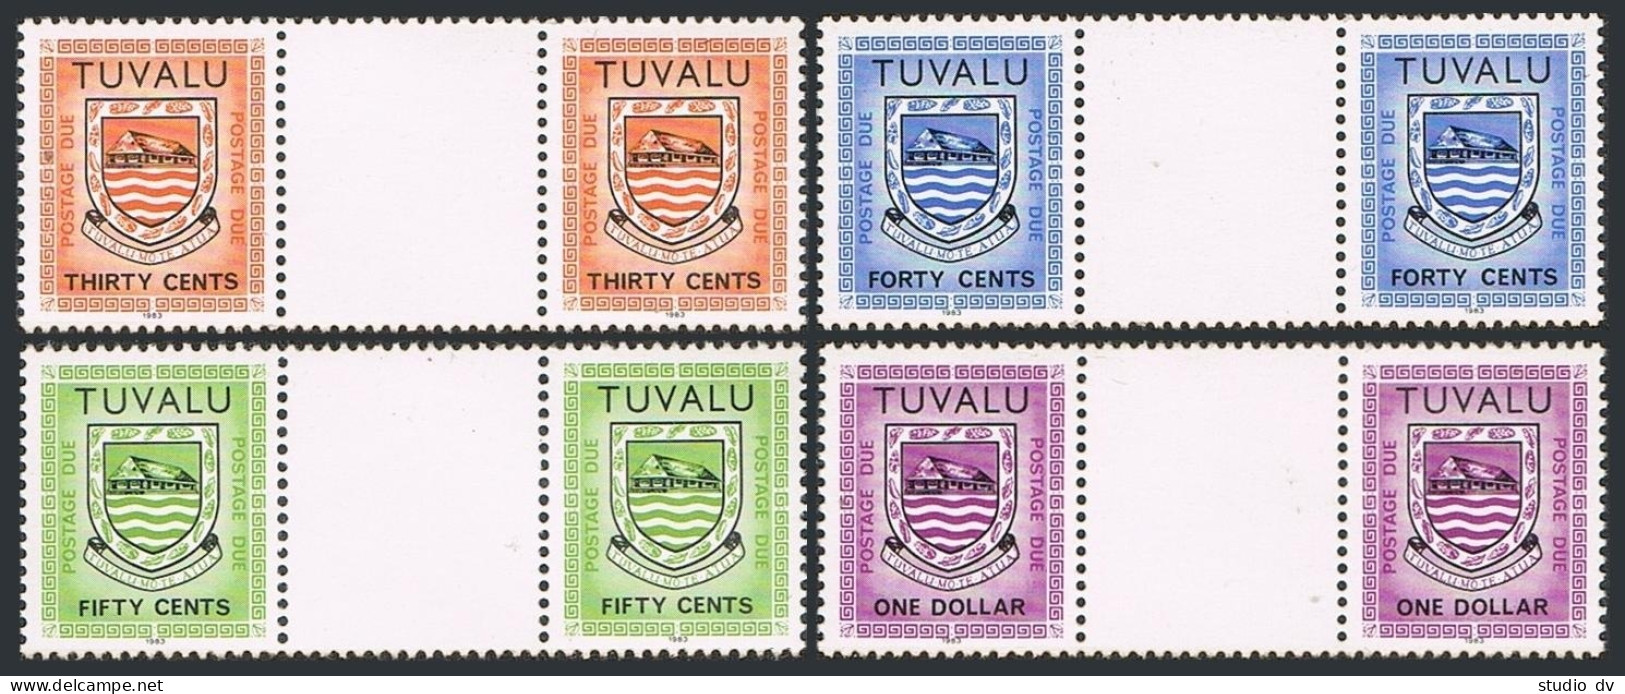 Tuvalu J6a-J9a Gutter Pair,inscribed 1983,MNH. Postage Due.Arms. - Tuvalu